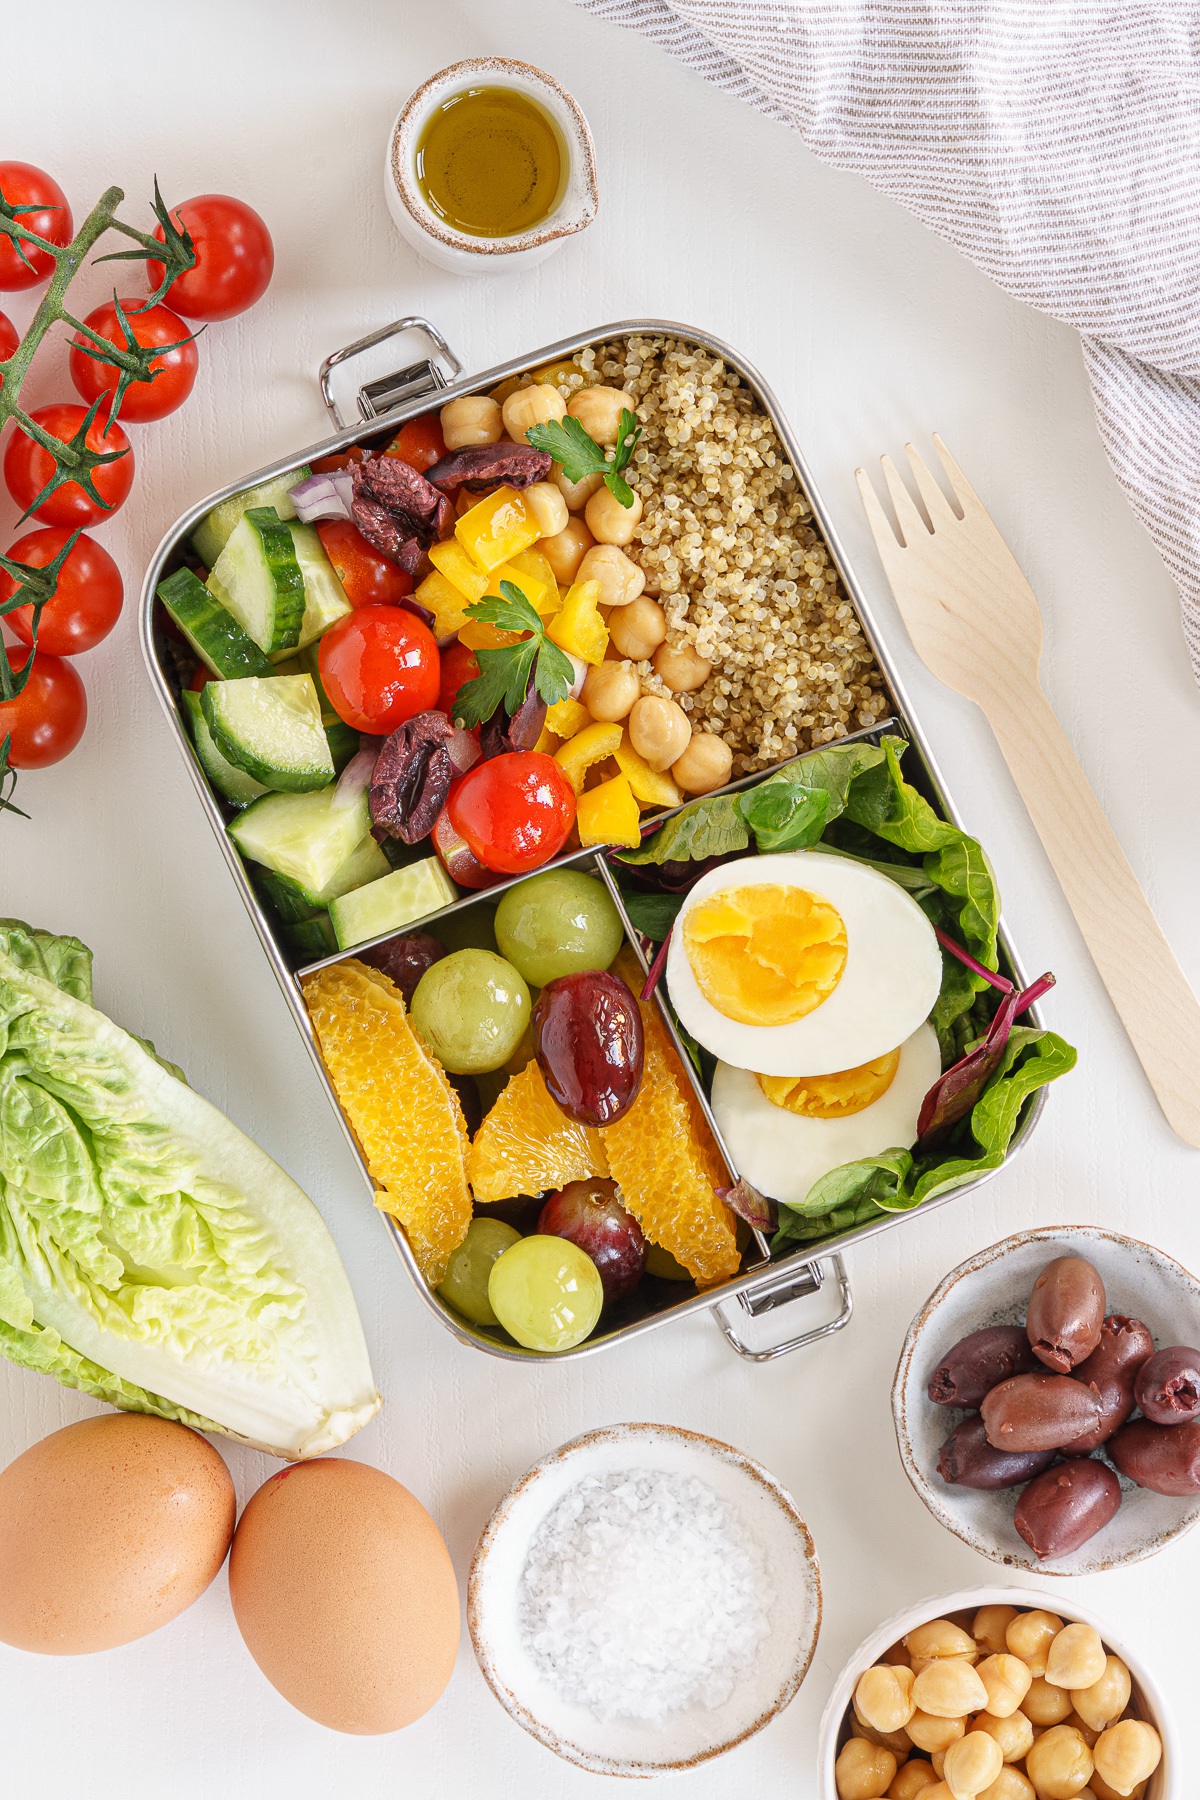 Bento box with eggs, salad and fruit.